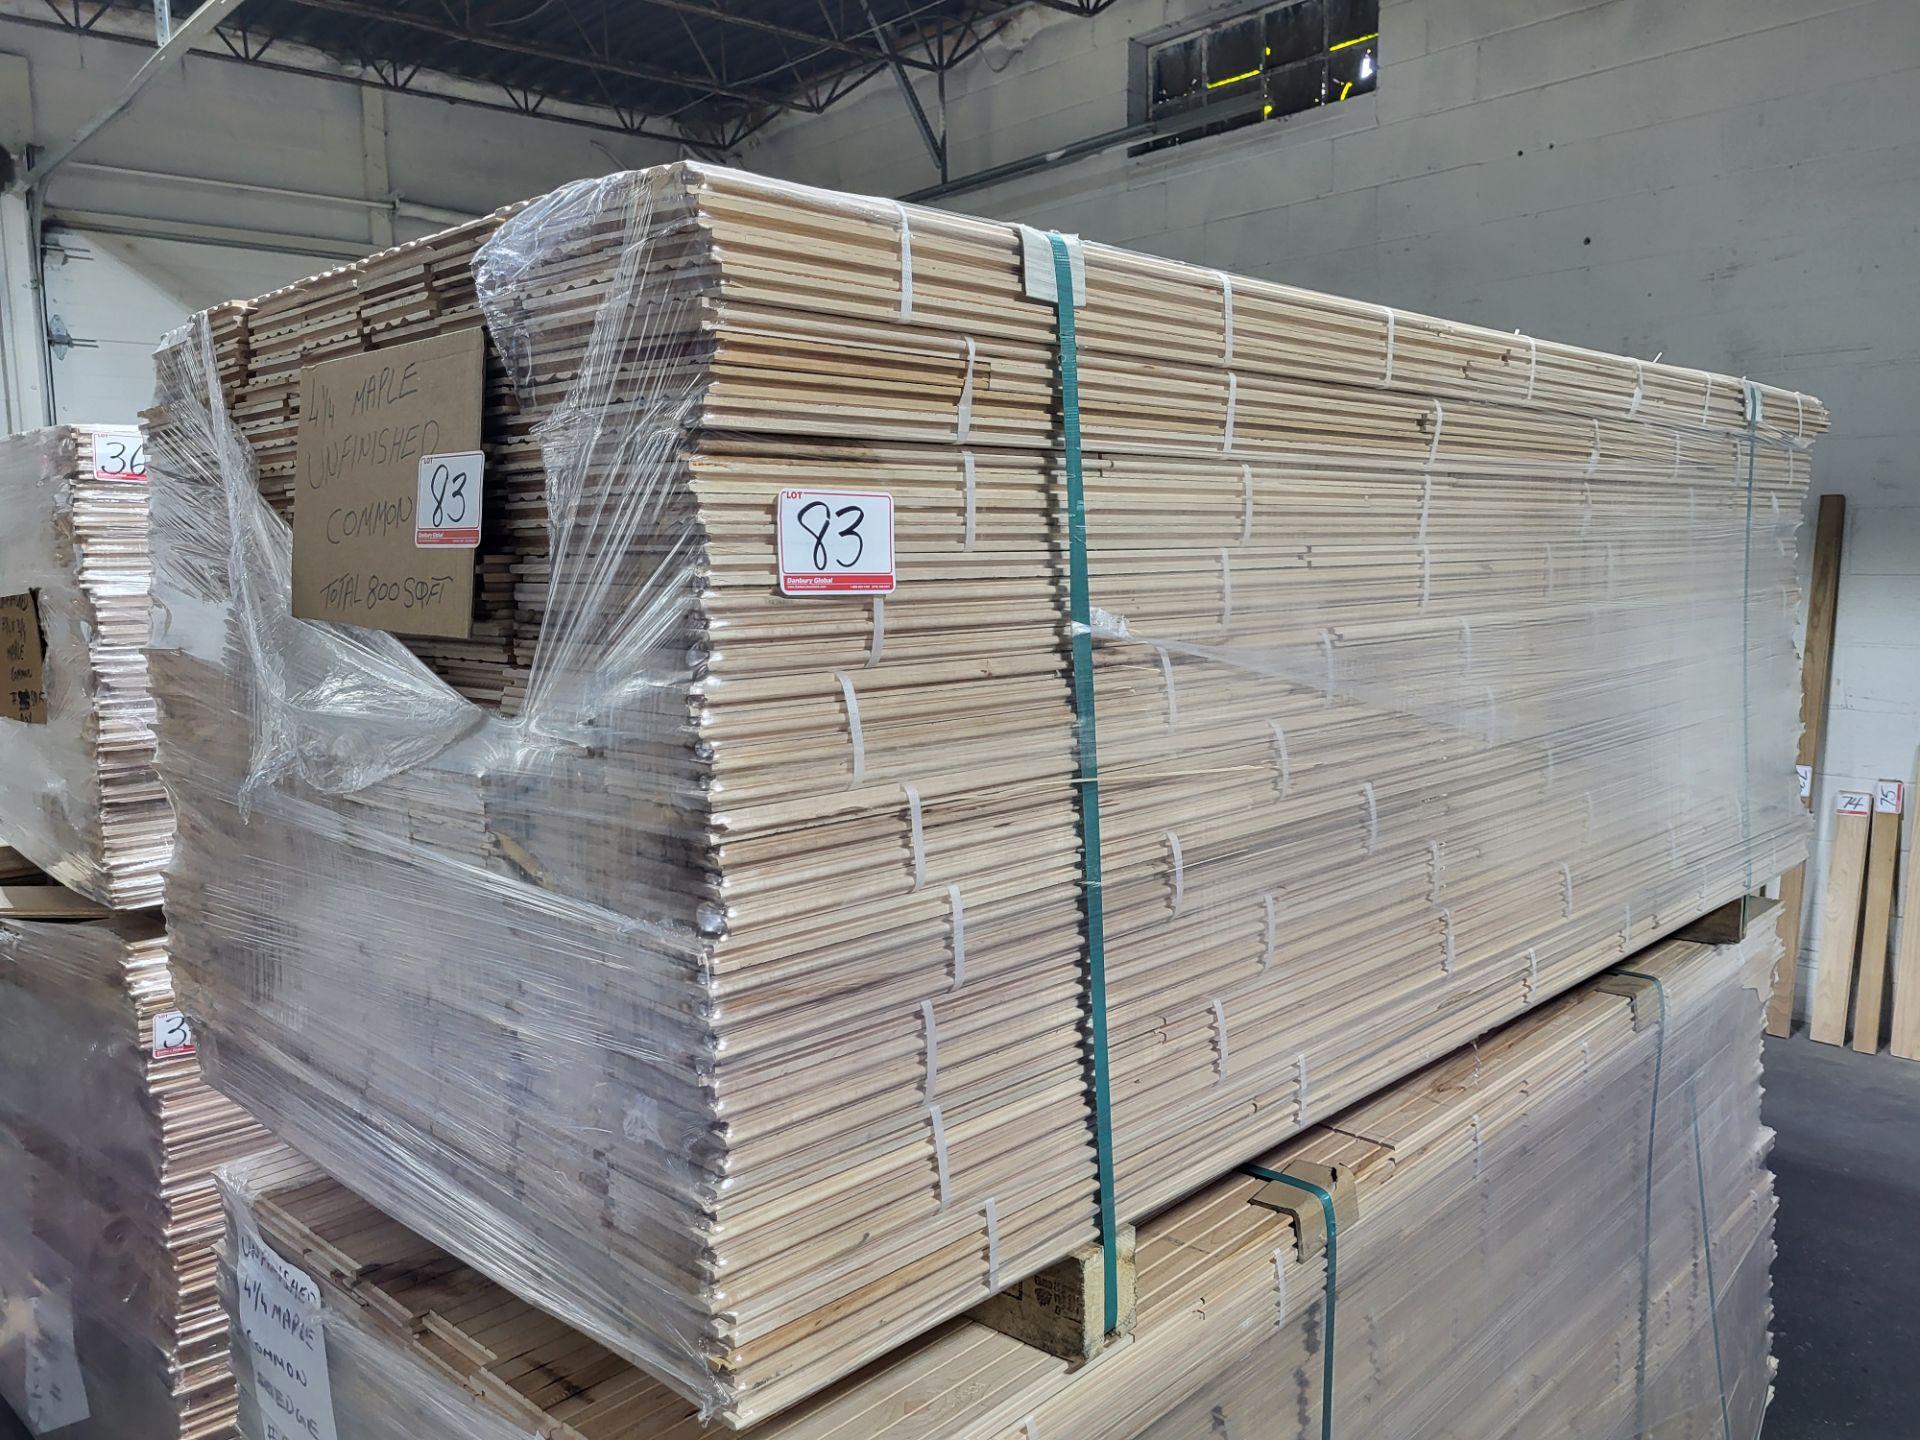 LOT - 4 1/4" MAPLE SQ EDGE UNFINISHED COMMON GRADE SOLID HARDWOOD FLOORING (APPROX 800 SQFT) - Image 2 of 2